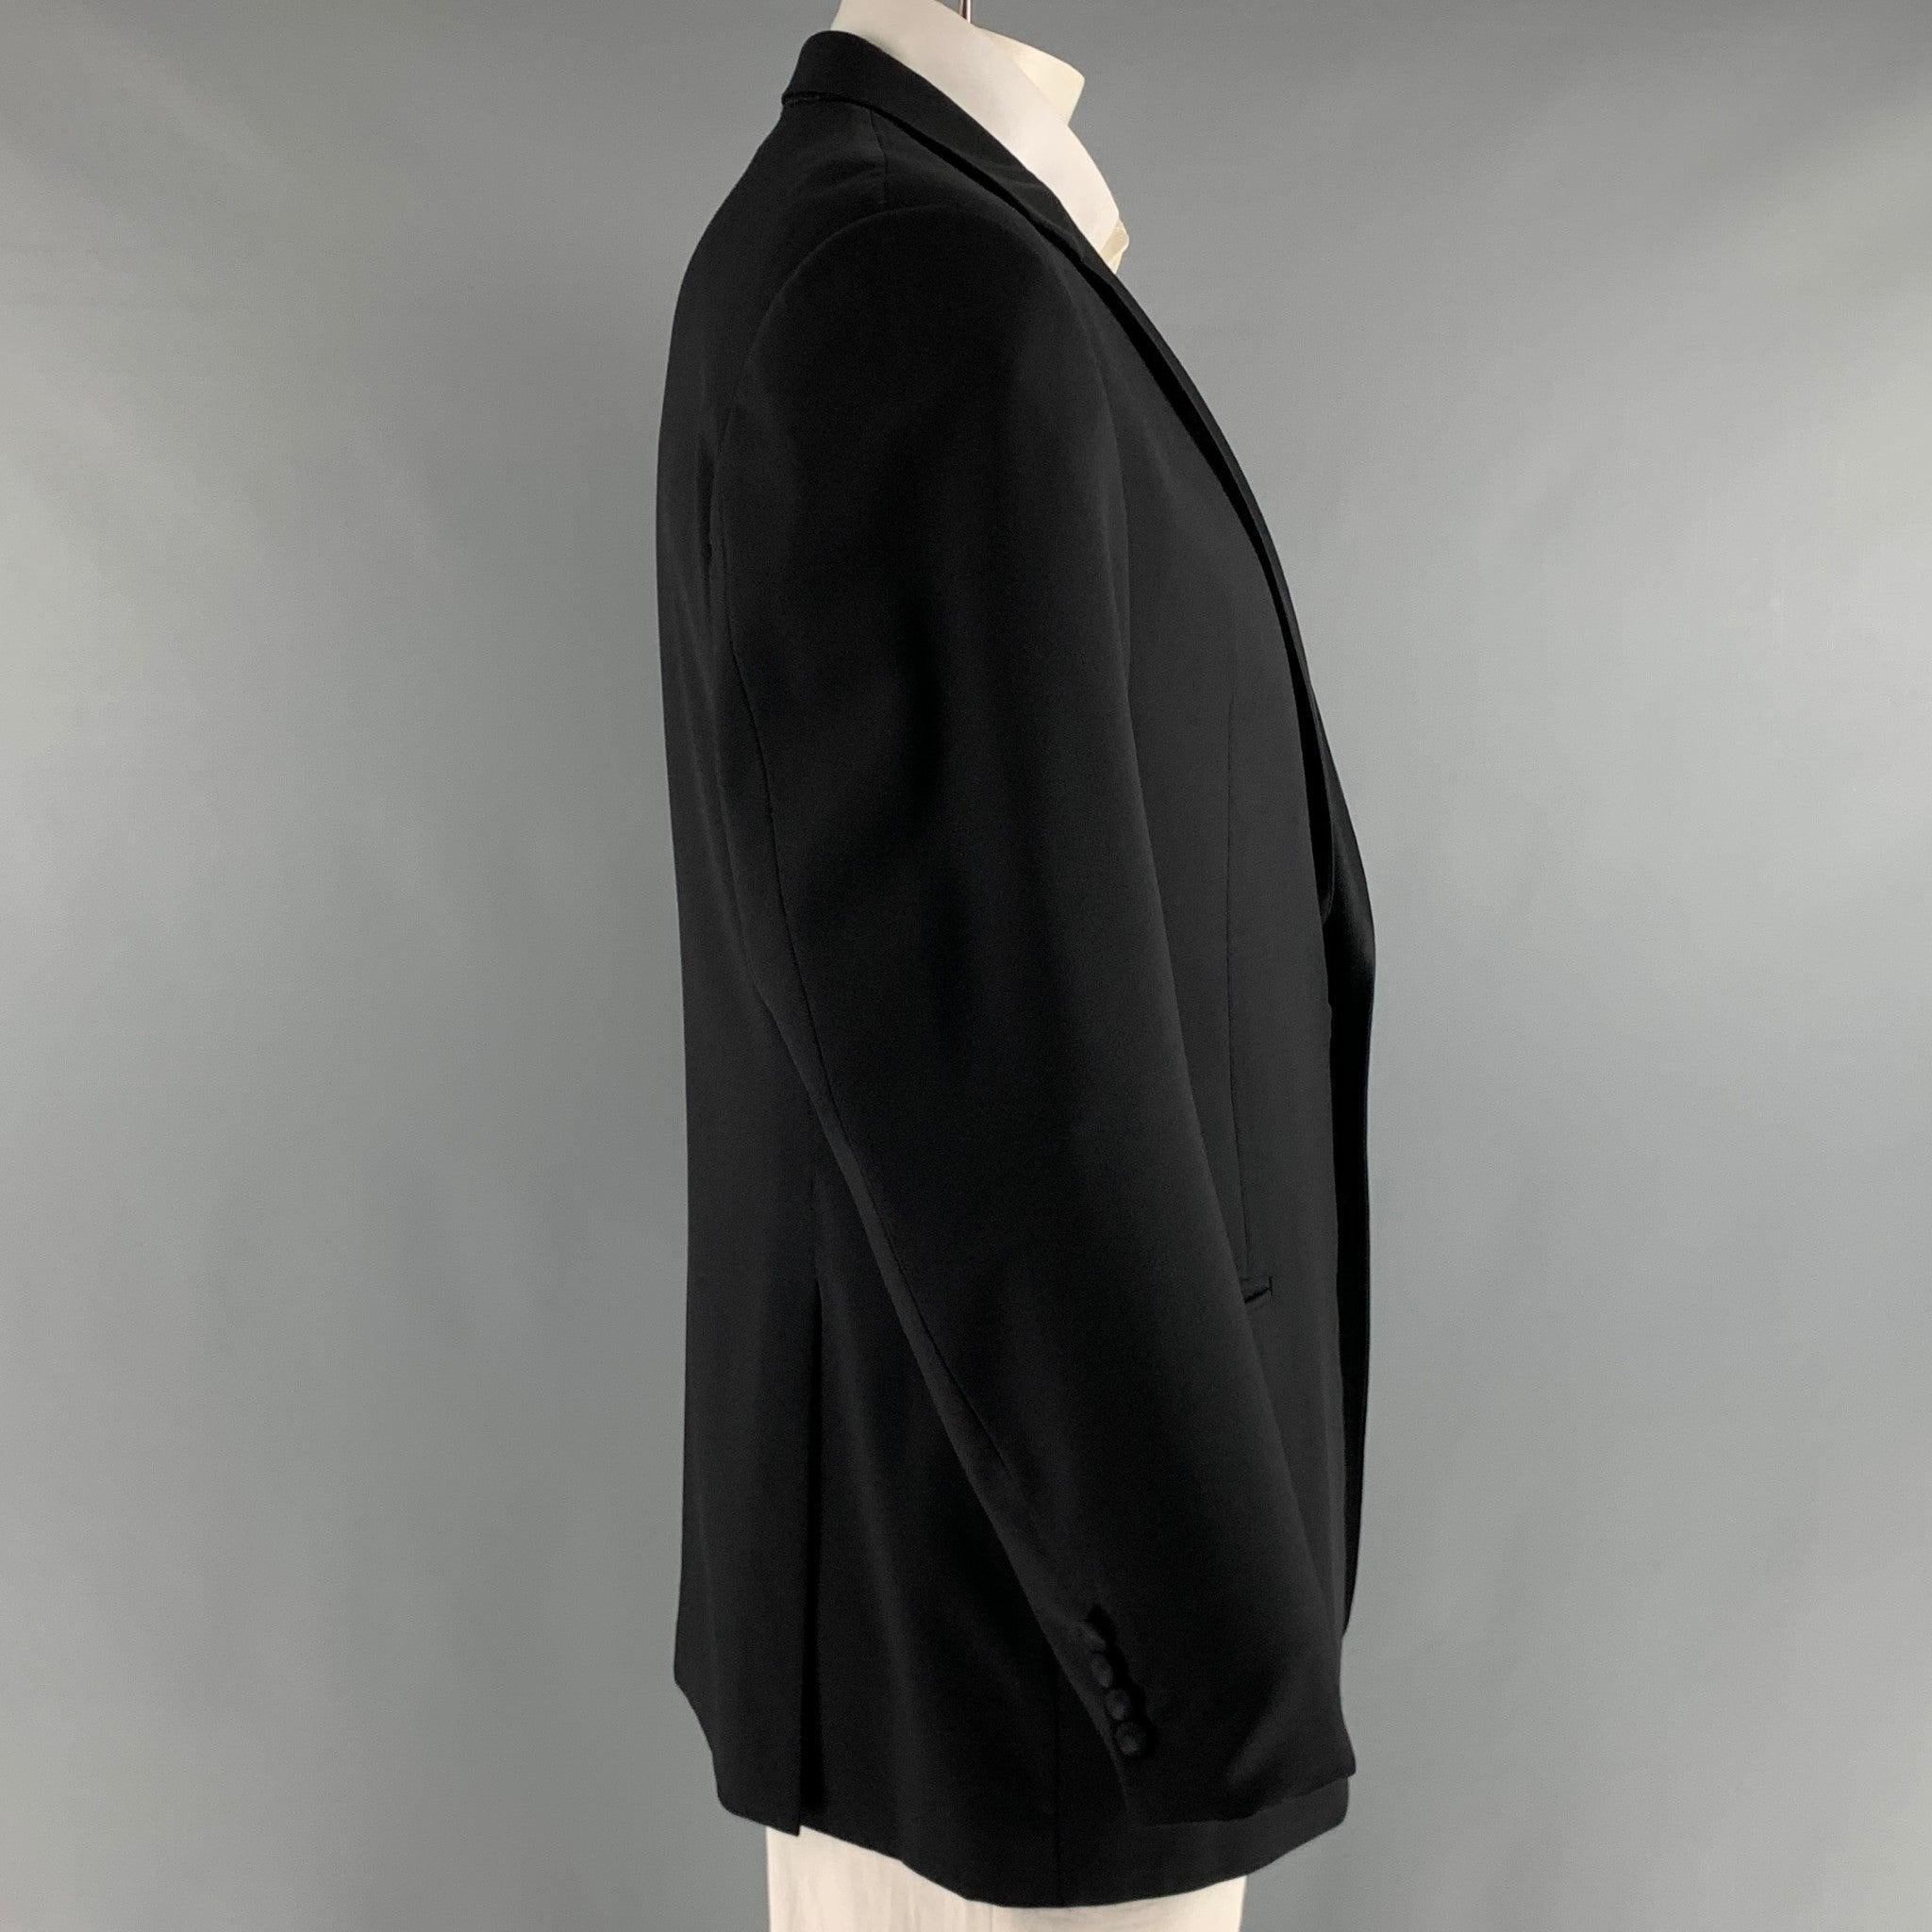 ARMANI COLLEZIONI GIORGIO tuxedo sport coat comes in a black wool woven with a full liner featuring a notch lapel, welt pockets, double back vent, and a single button closure. Made in Italy.Excellent Pre-Owned Condition. 

Marked:   44